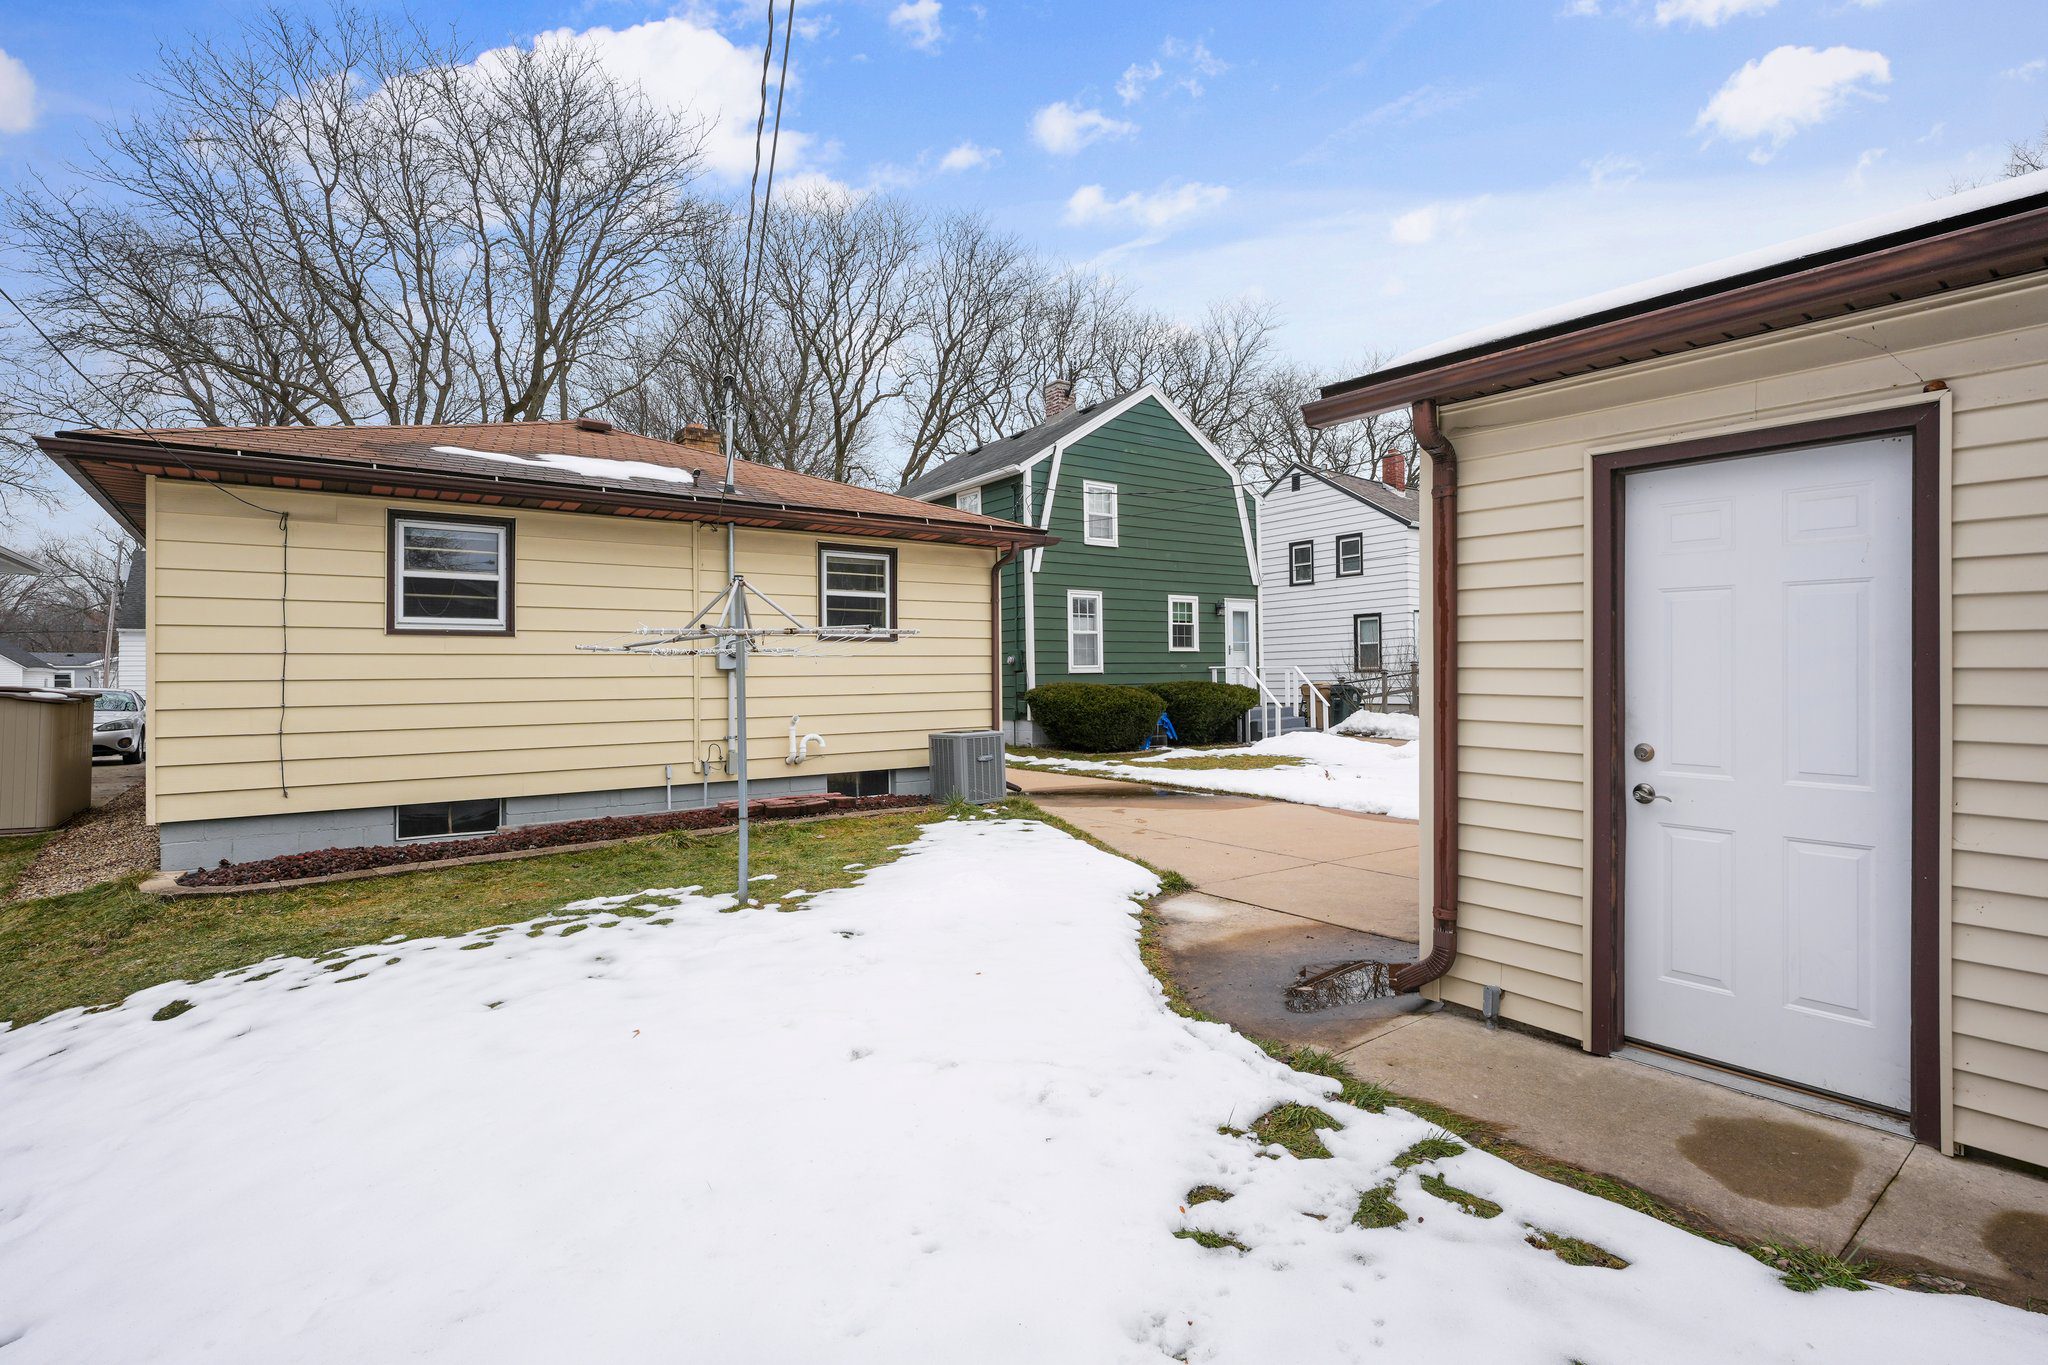 9-web-or-mls-536-pawling-st